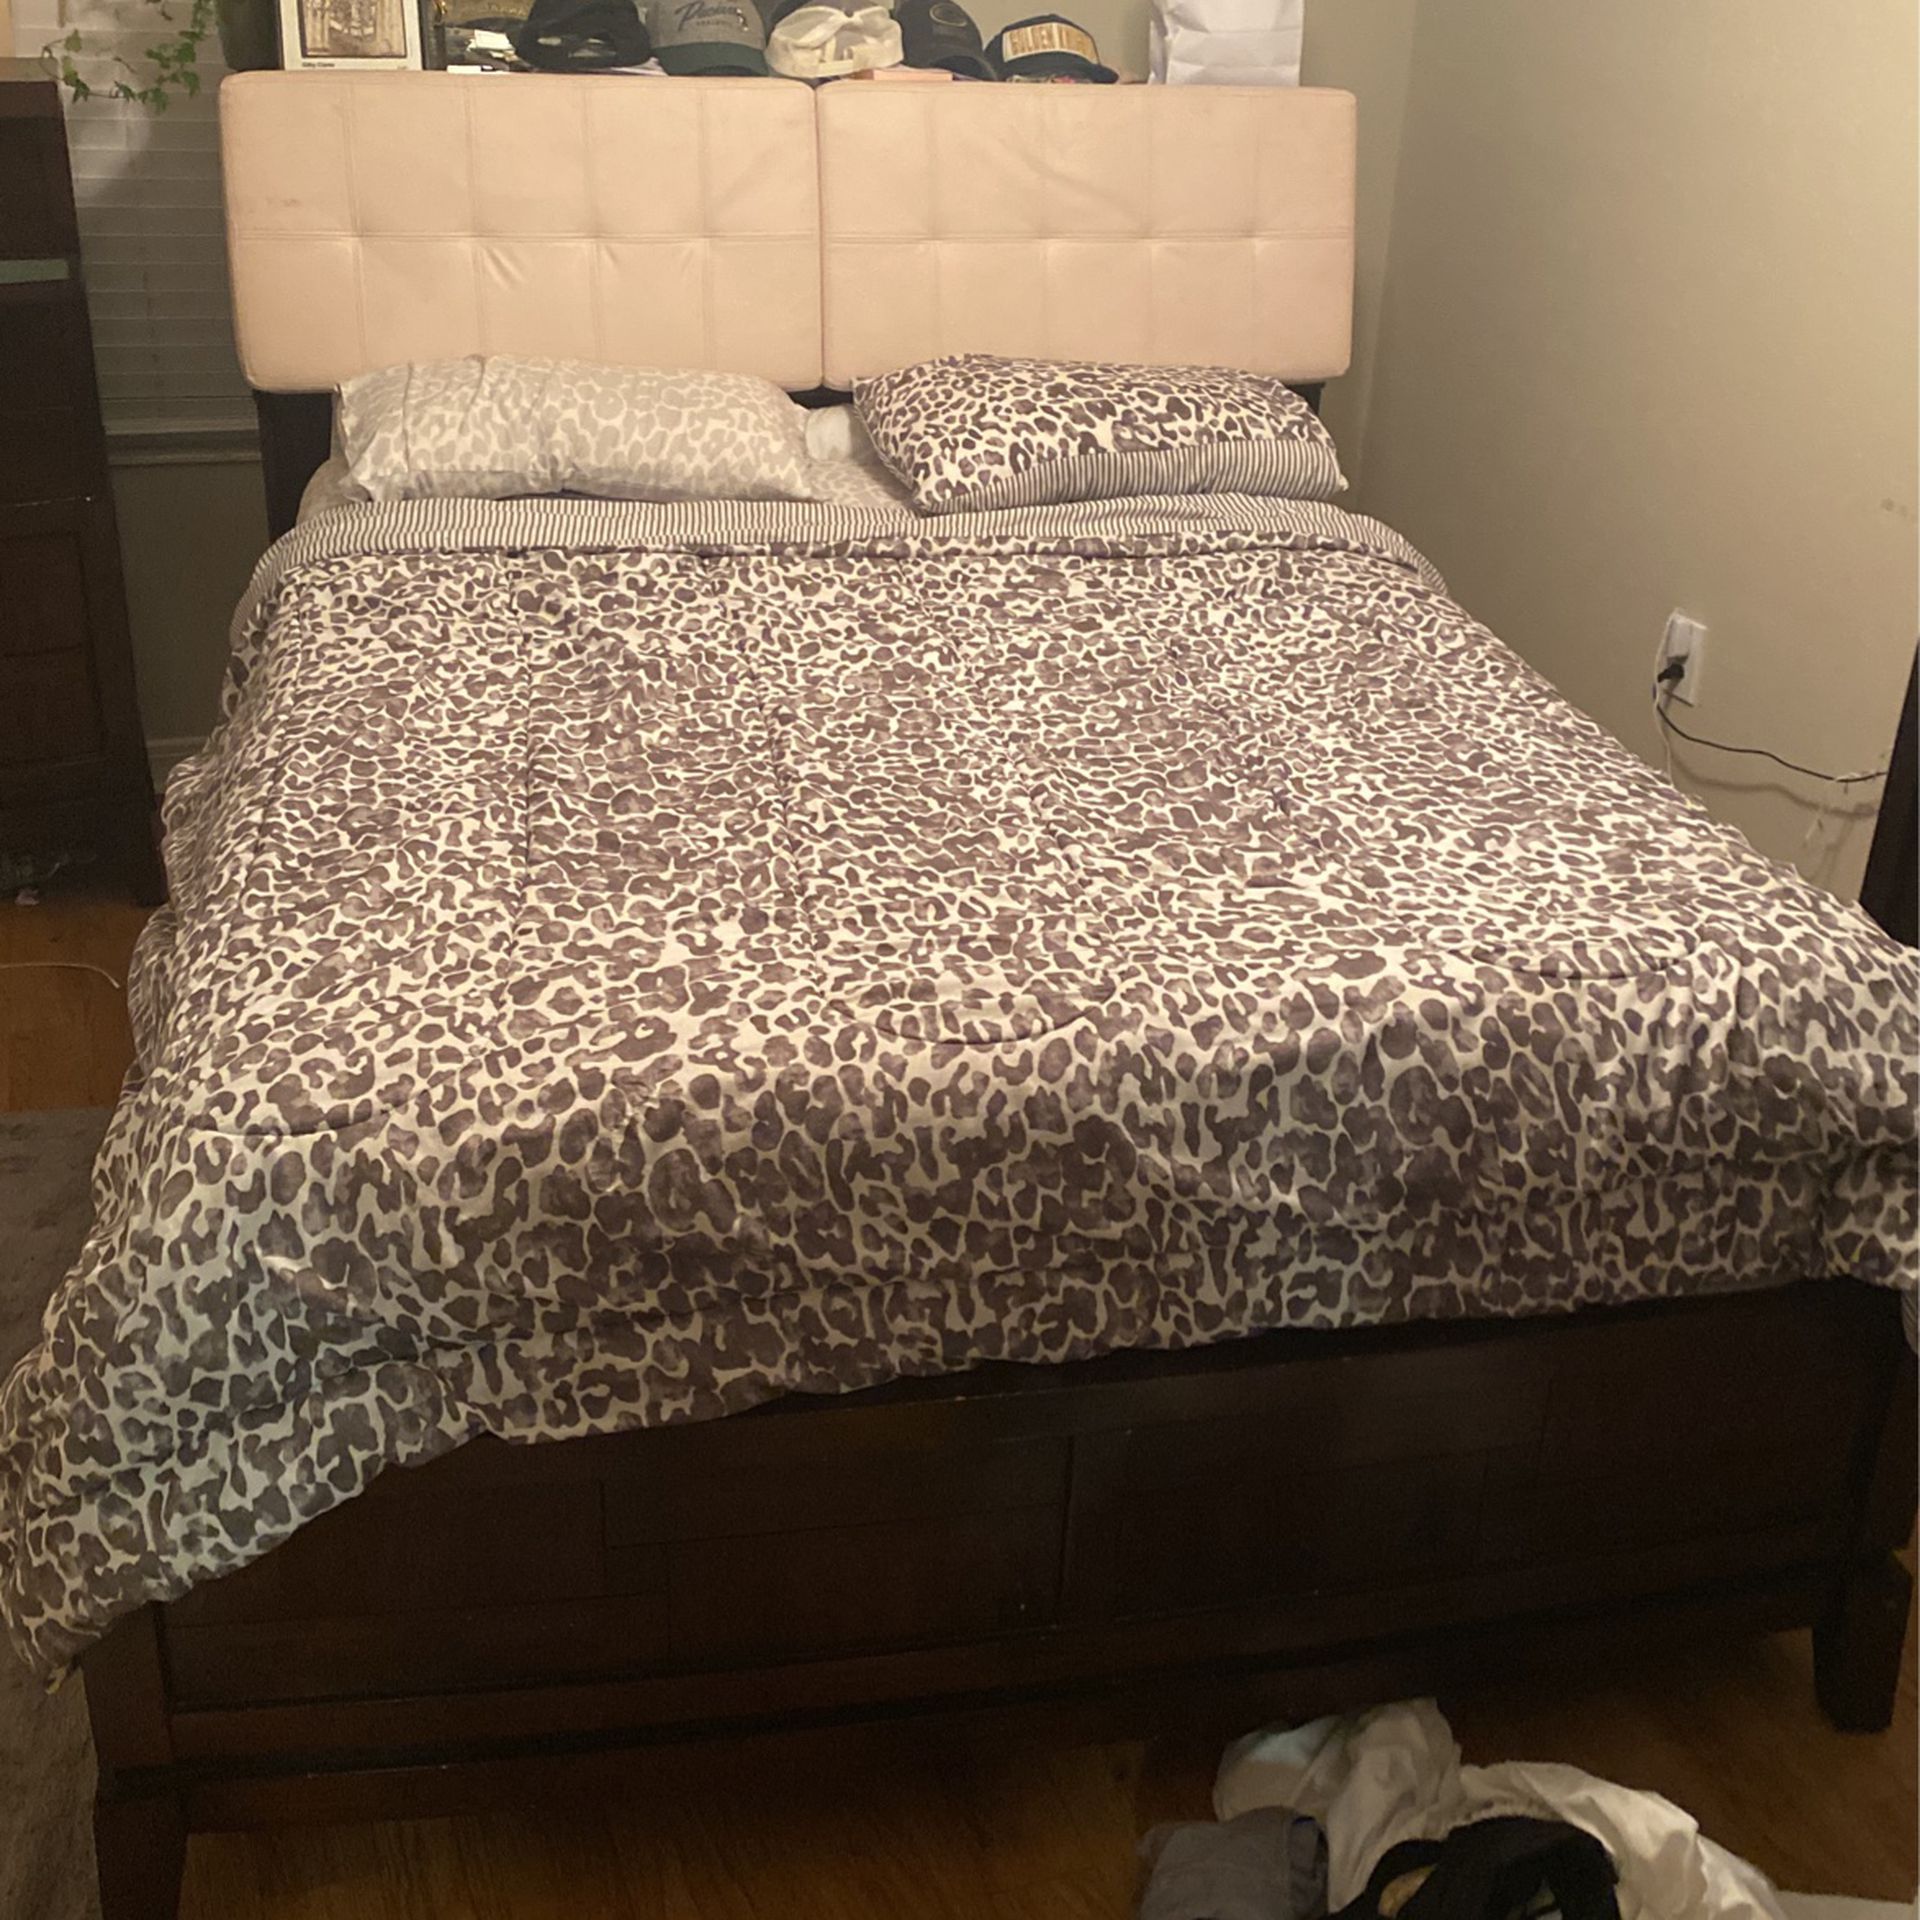 Queen Bedroom Set Ashley Furniture , Light Up Night Stand, Long 6 Drawer Dresser With 4’by 4’ Detachable Mirror , Bed Has Two Beautiful Fold Down Comp